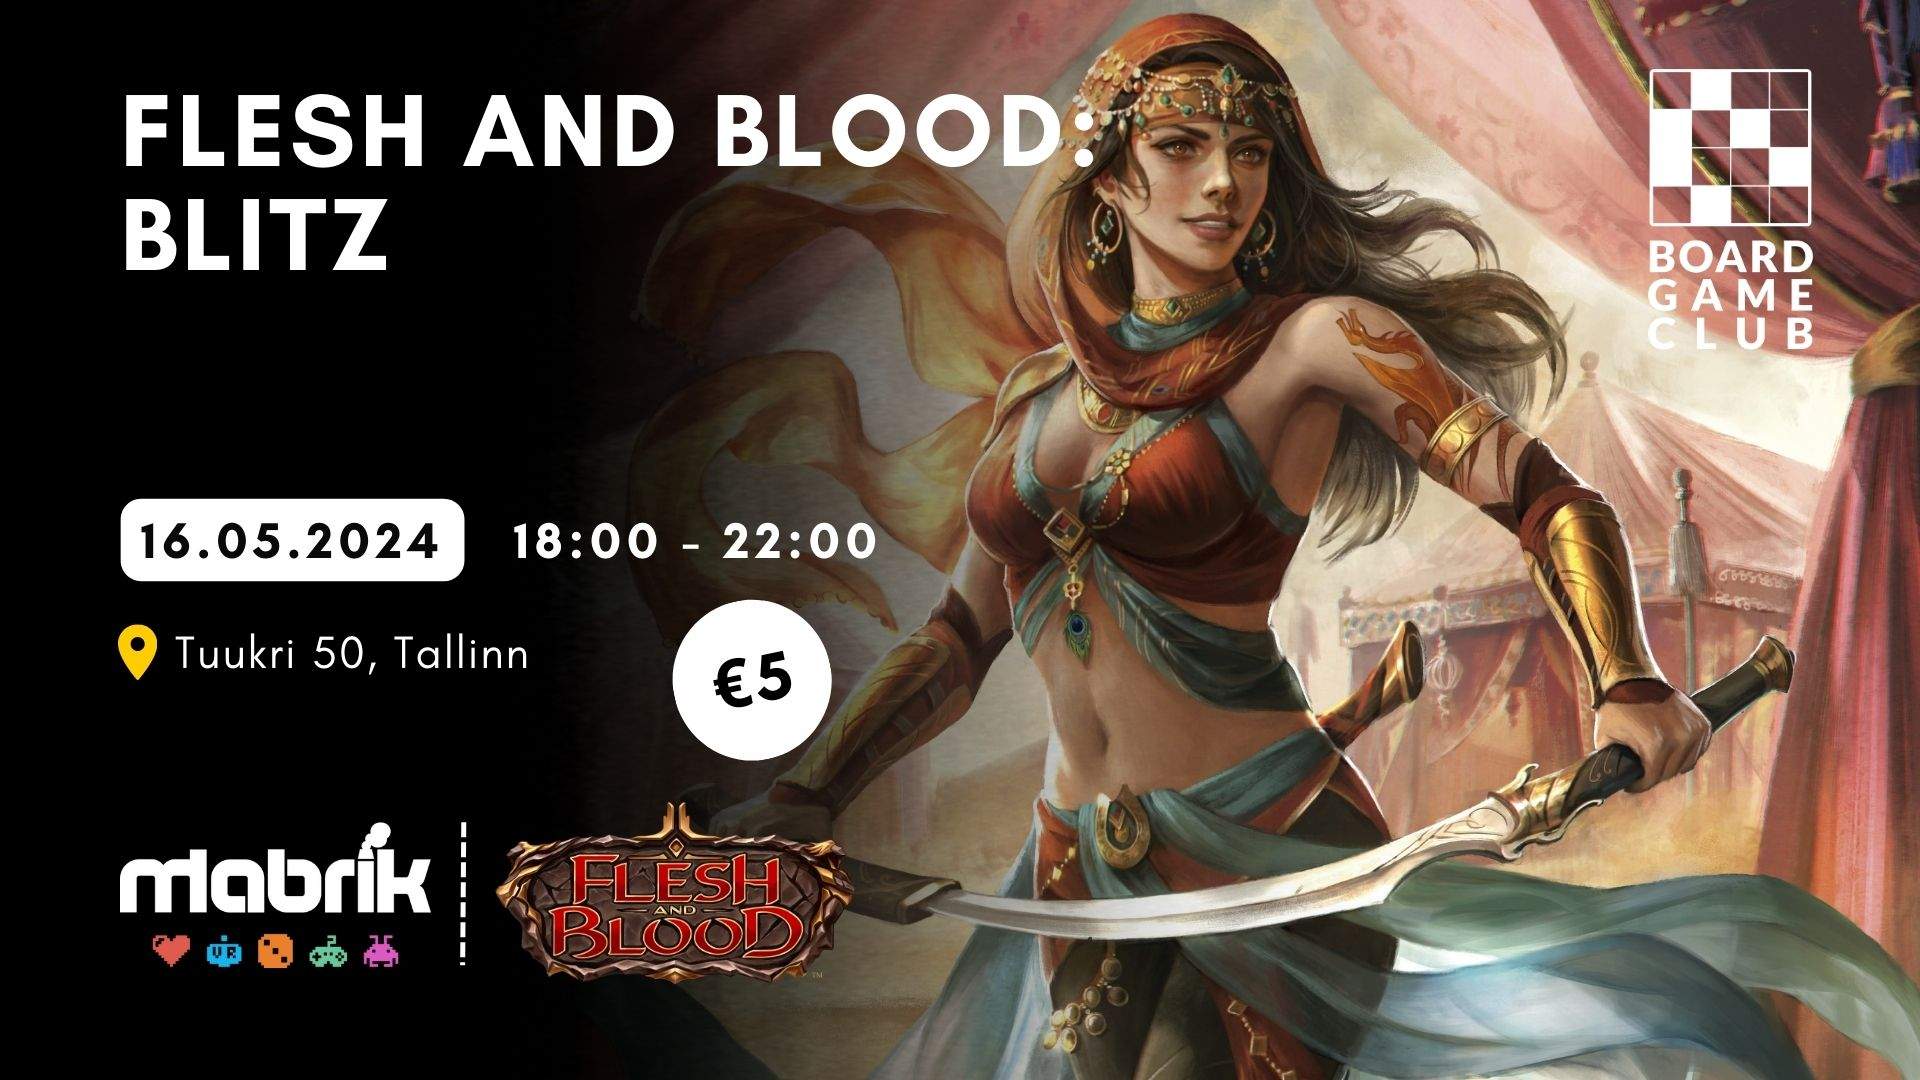 Events - 16.05.2024 - Flesh and Blood - Blitz